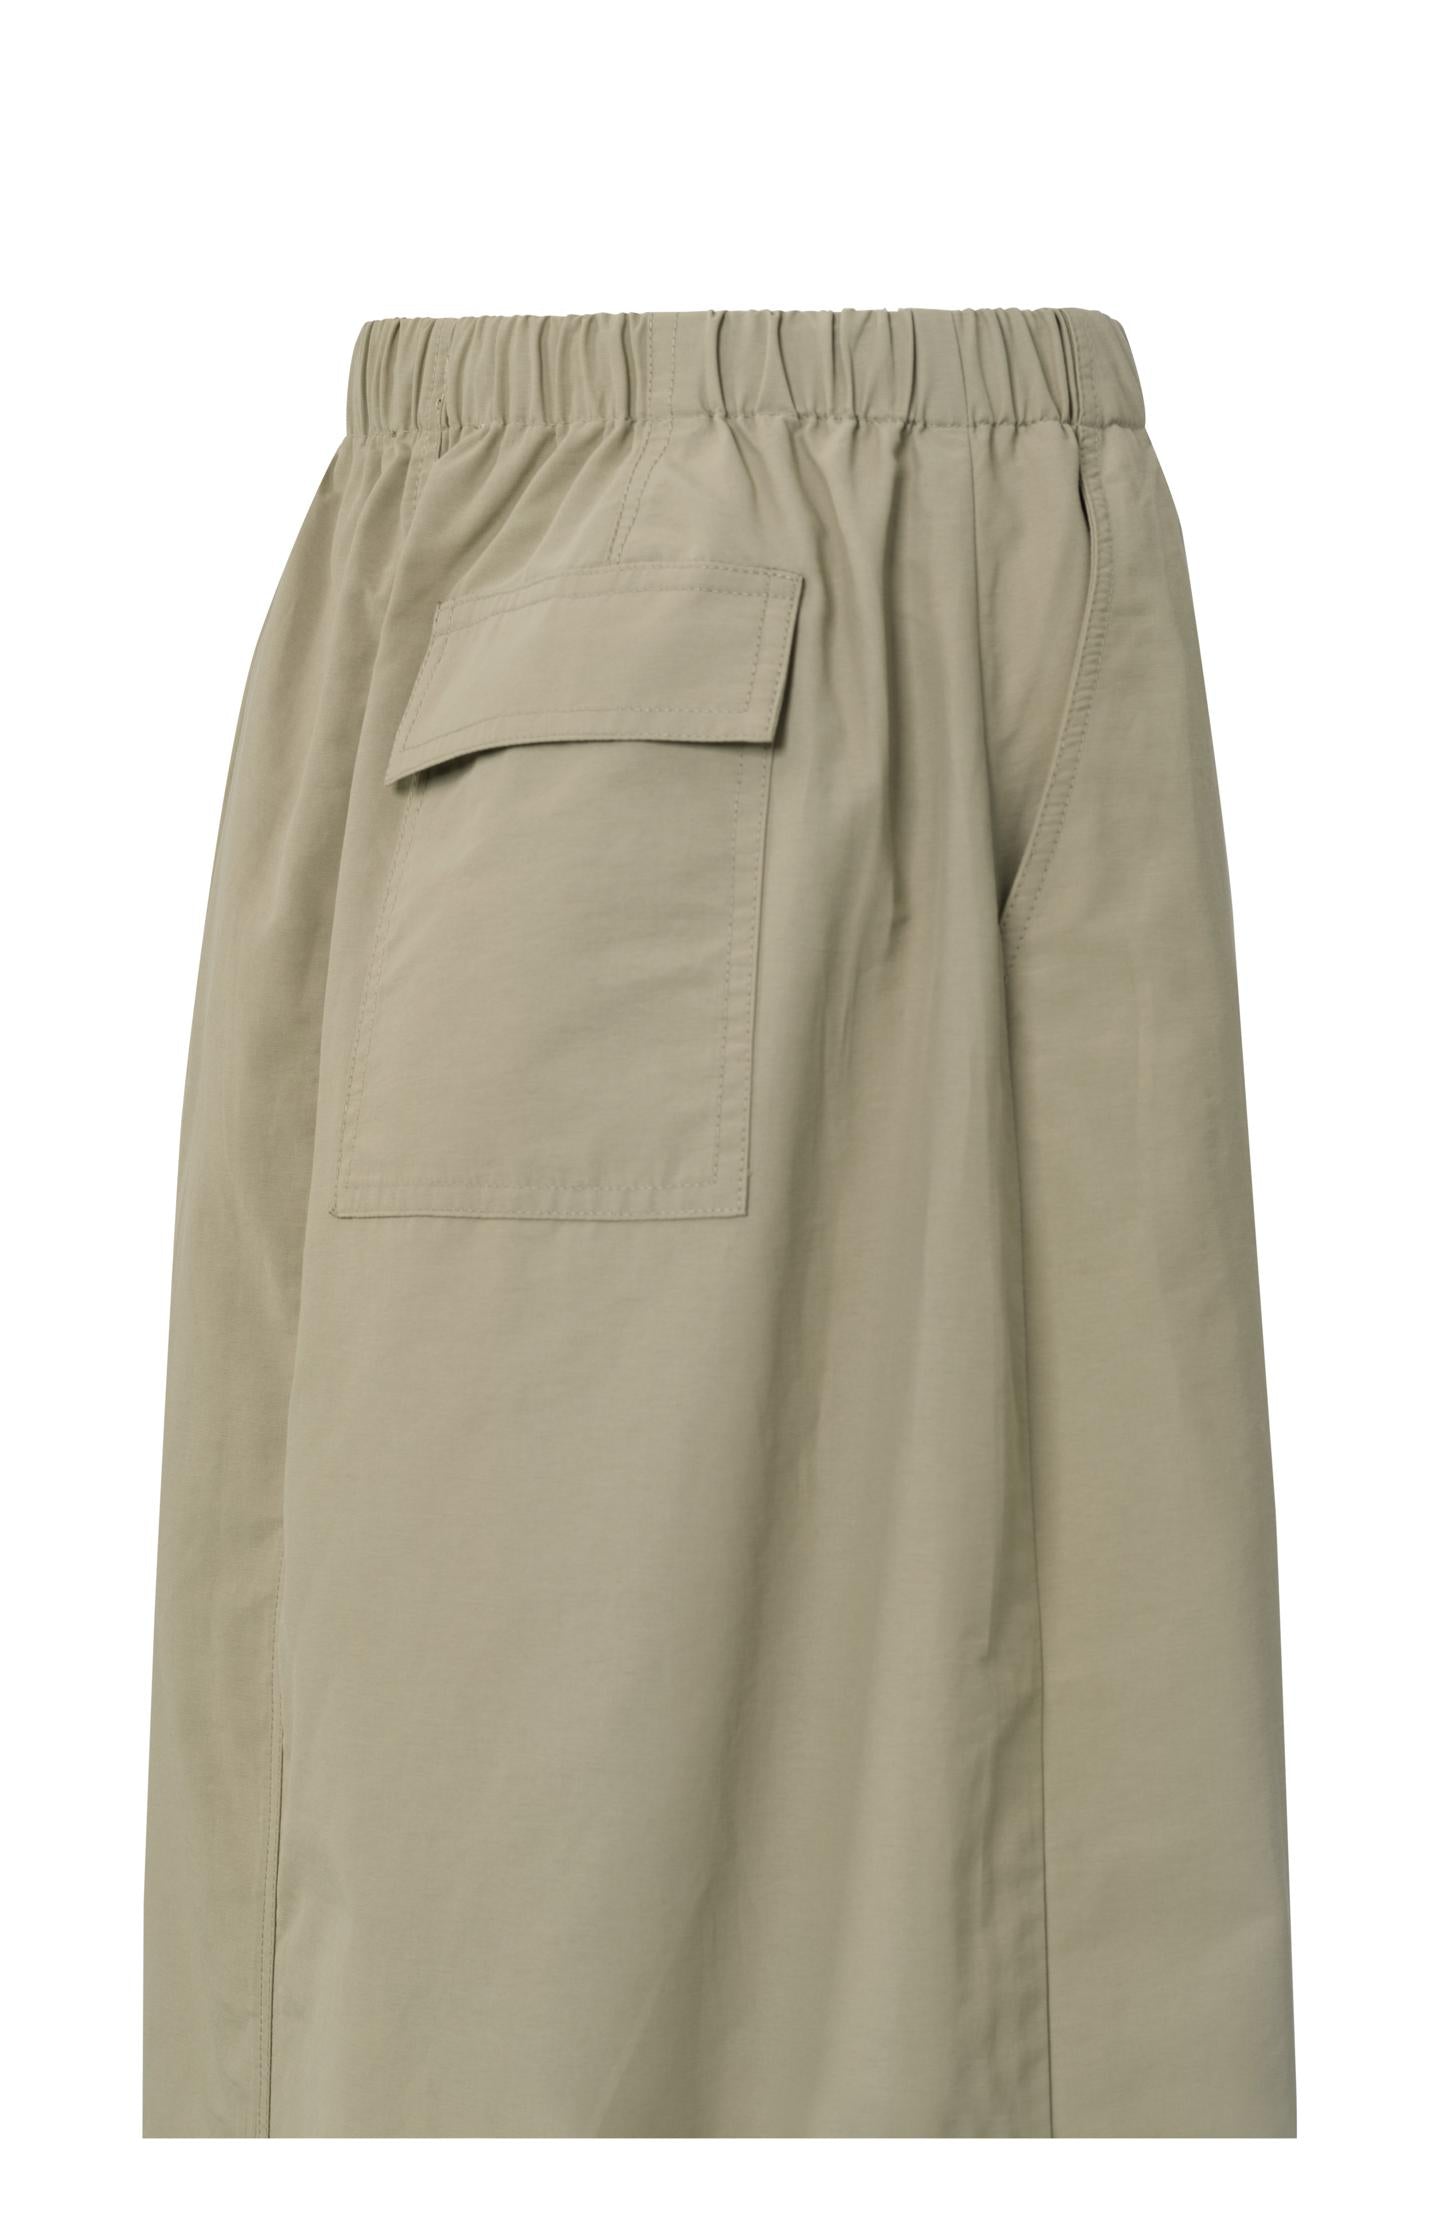 Cargo midi skirt with pockets and a drawstring in nylon - Winter Twig Beige